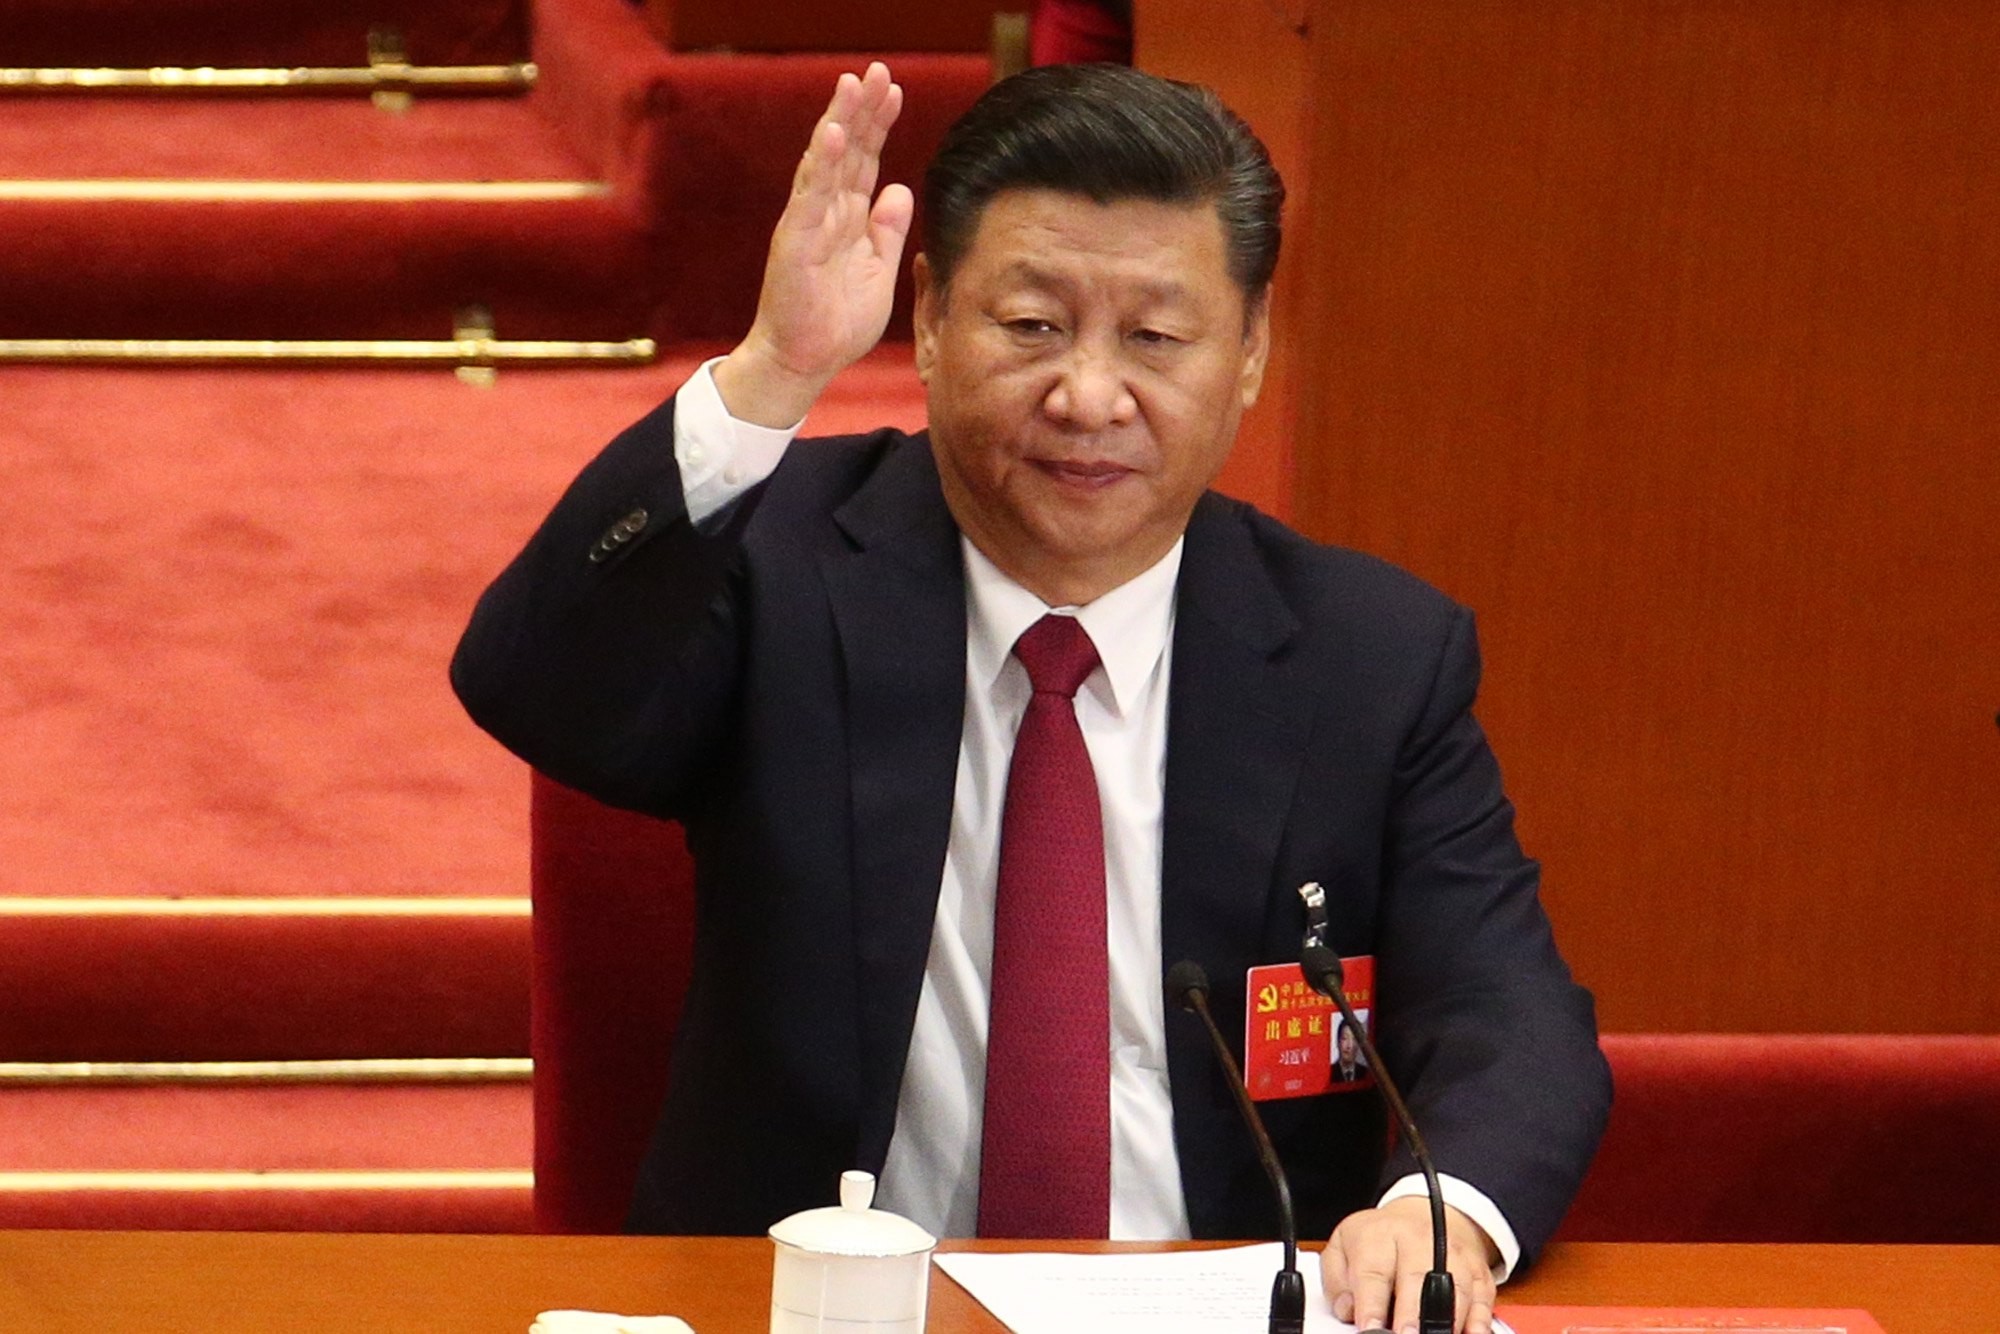 Chinese President and General Secretary of the Communist Party of China Xi Jinping raises hand to take a vote during the closing ceremony of the 19th National Congress of the Communist Party of China. Photo: EPA